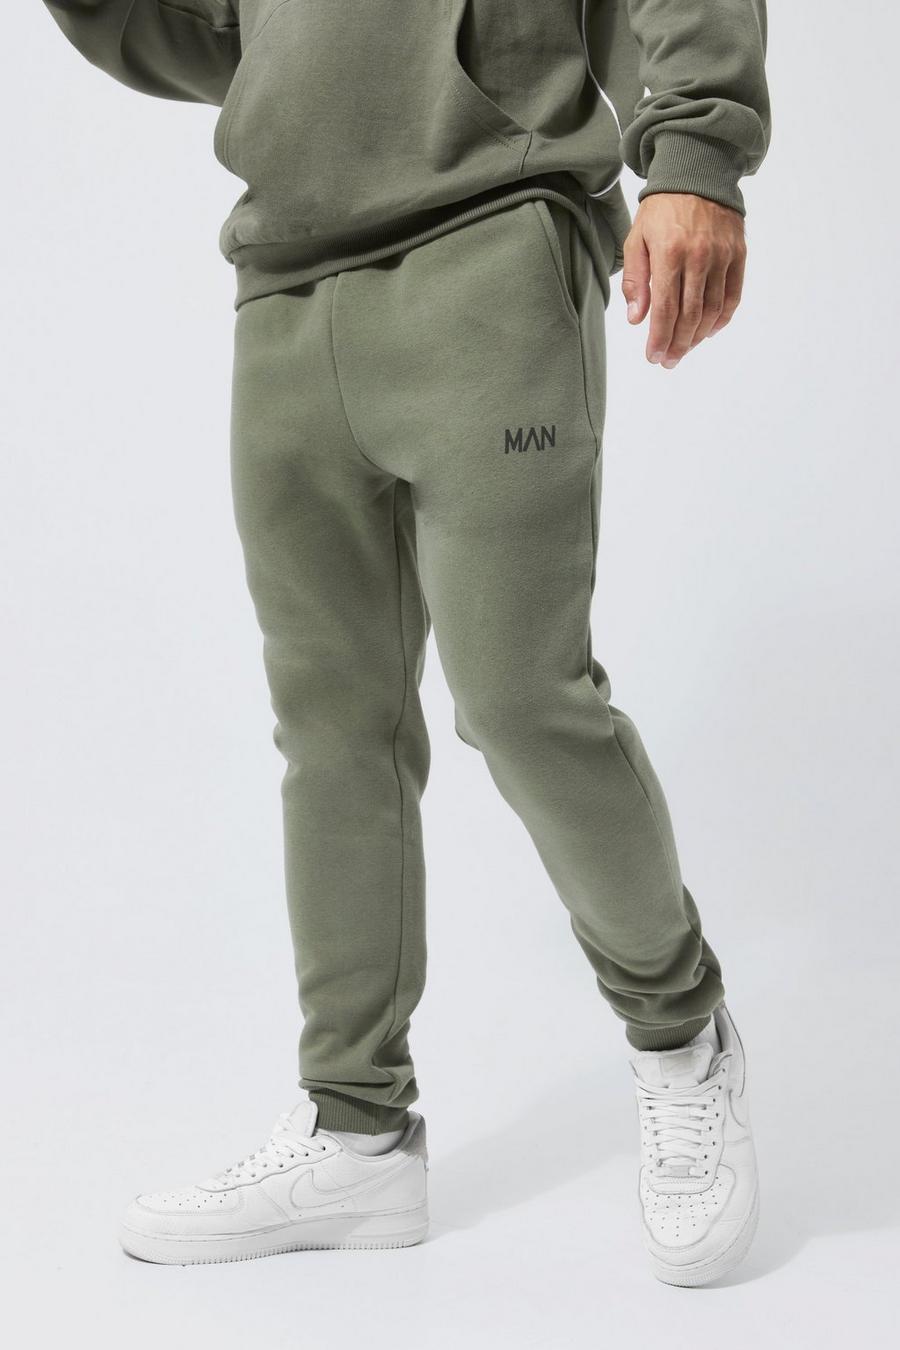 discount 62% Beige S Boohoo tracksuit and joggers MEN FASHION Trousers Sports 